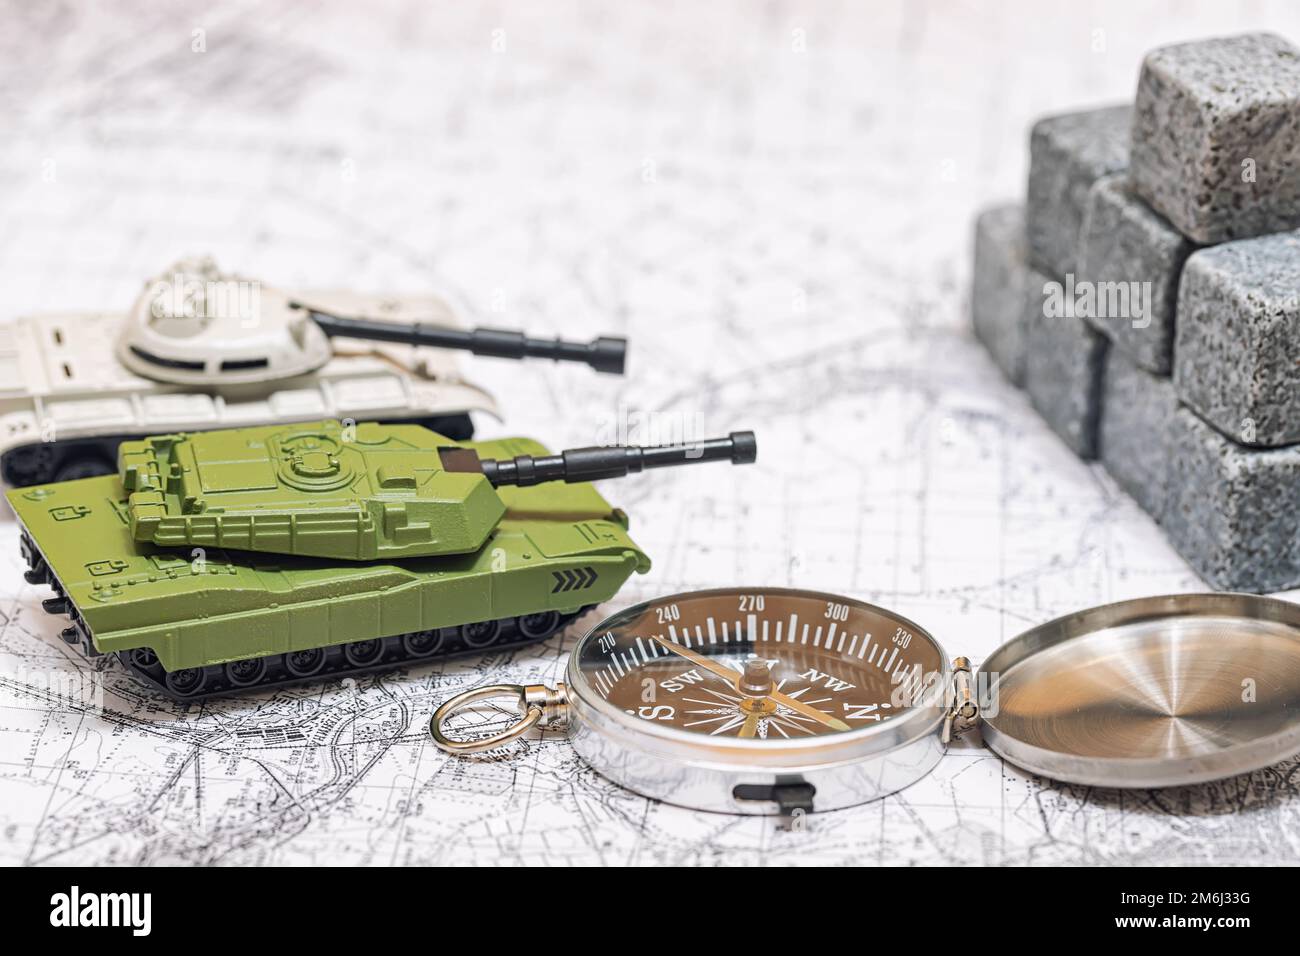 Toy models of tanks jointly attack enemy fortifications Stock Photo